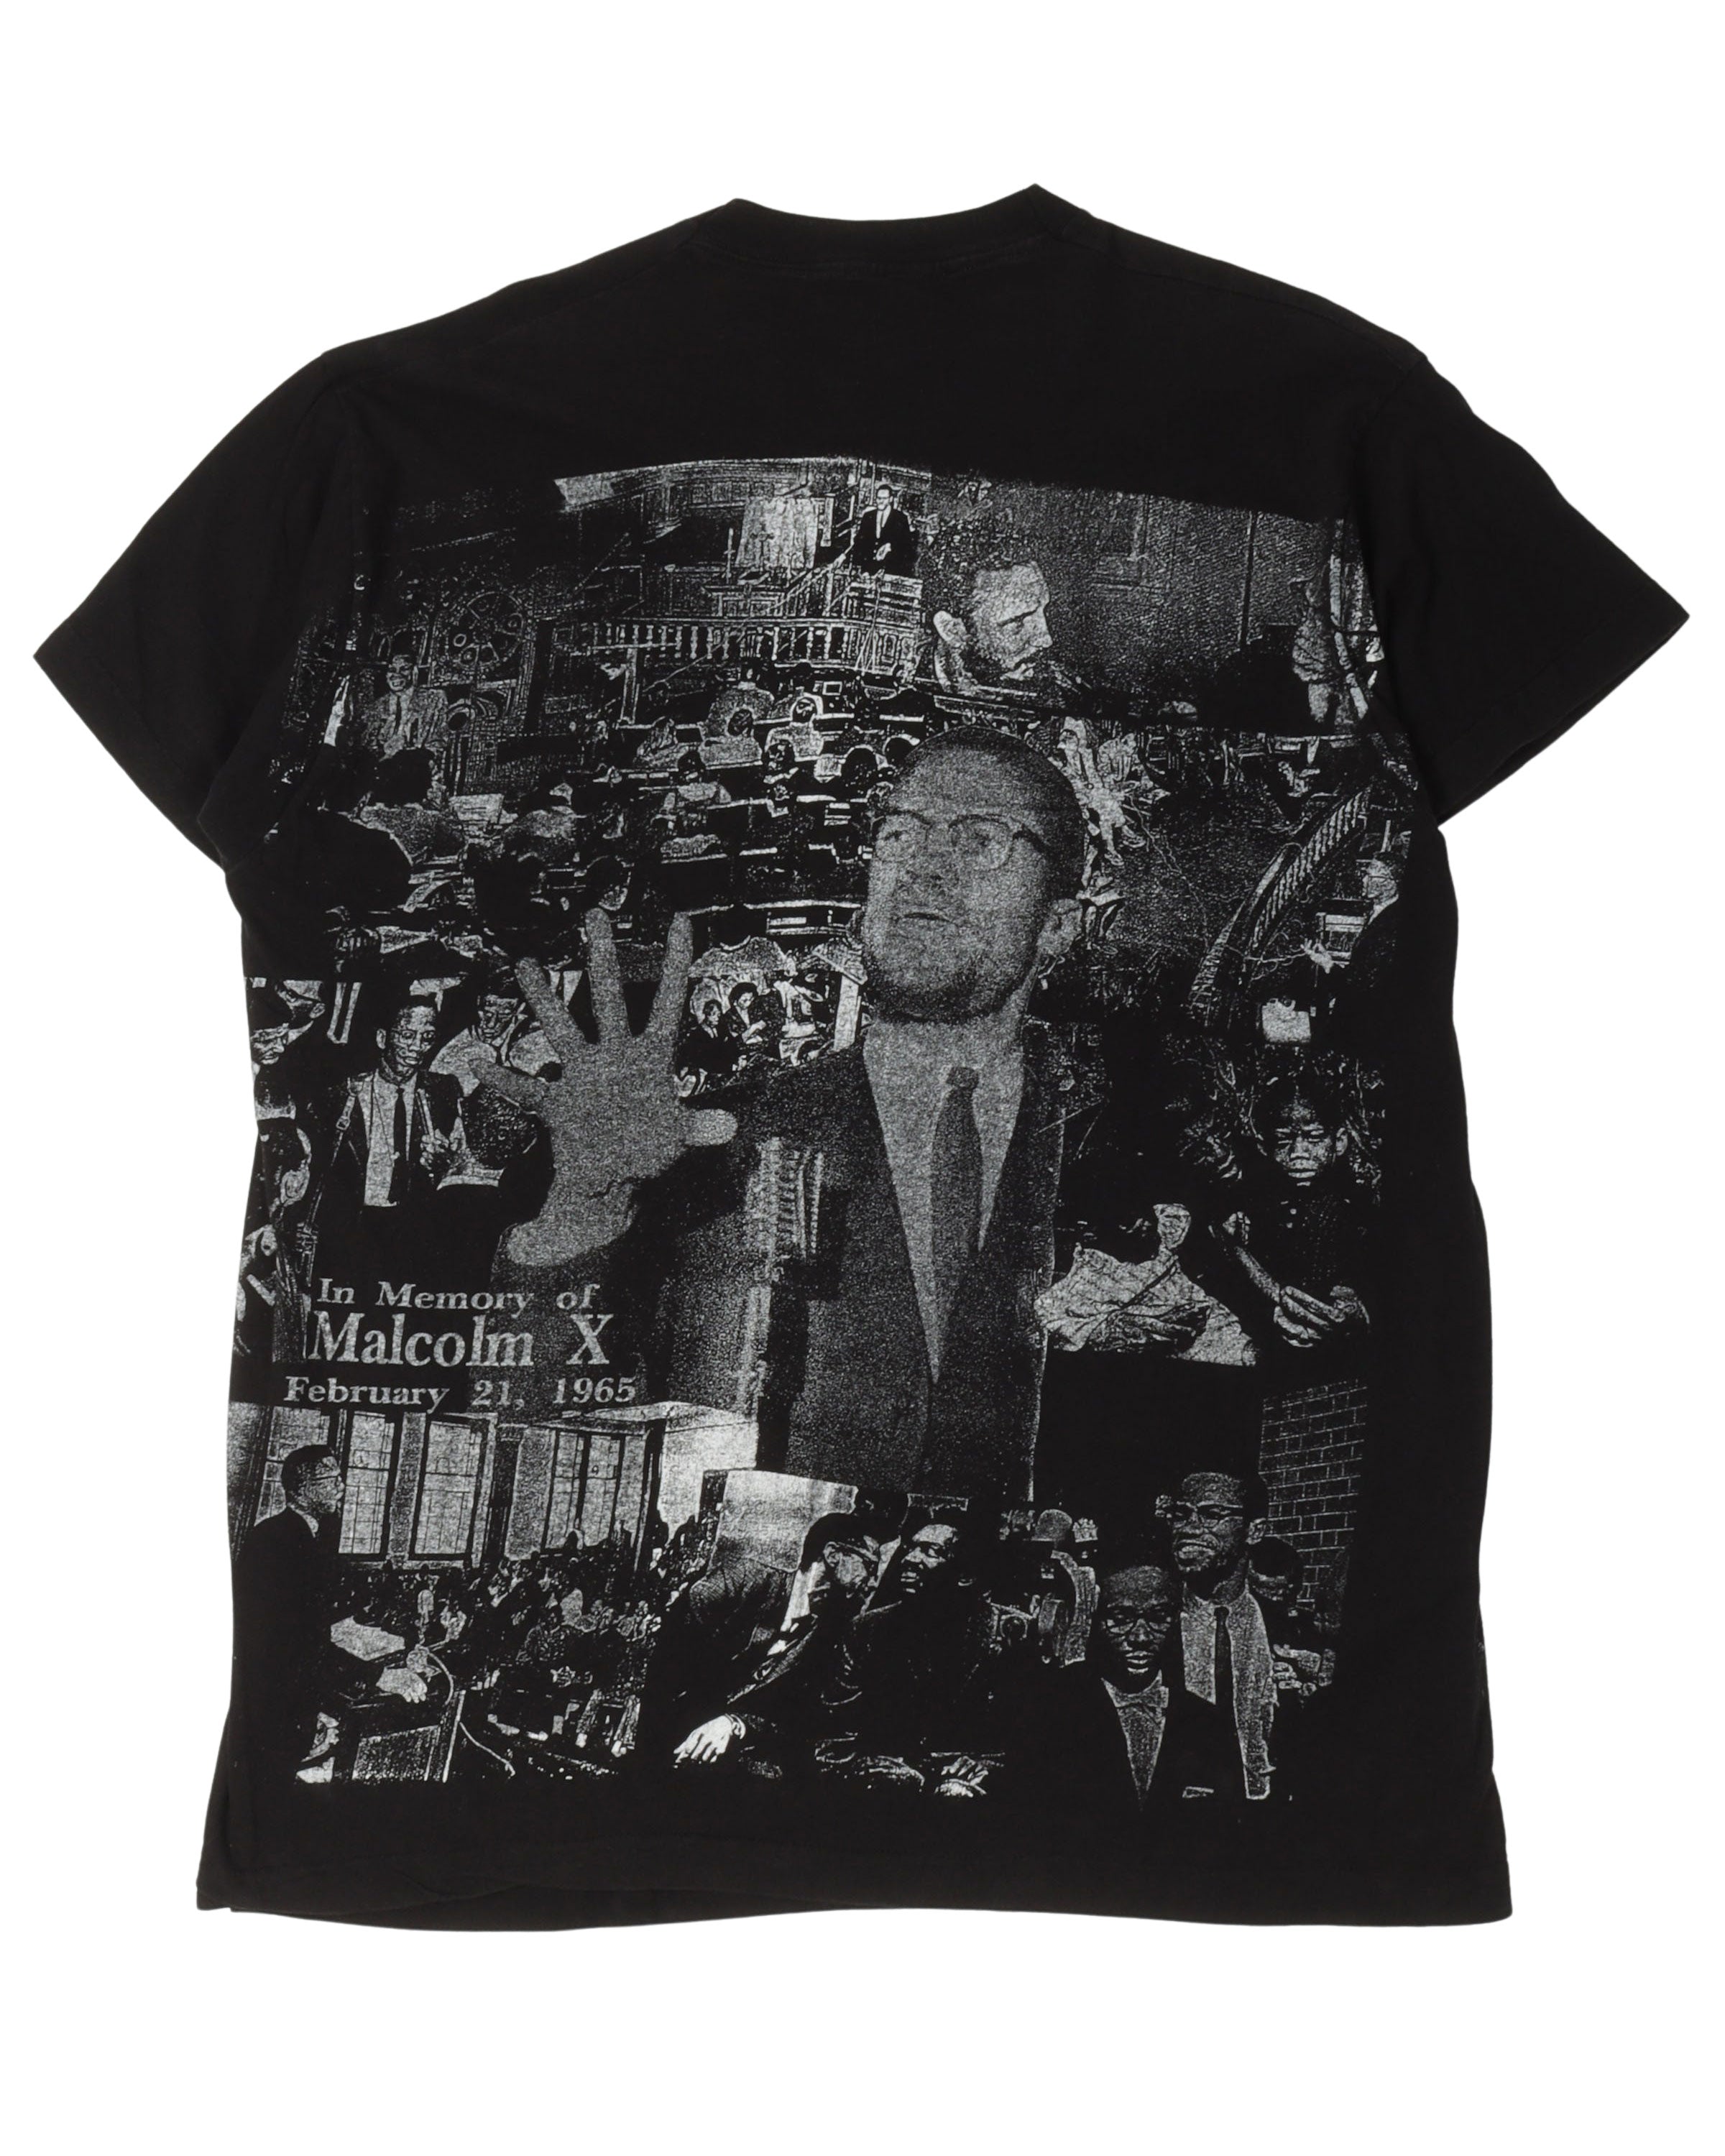 Martin Luther King Jr. and Malcom X T-Shirt